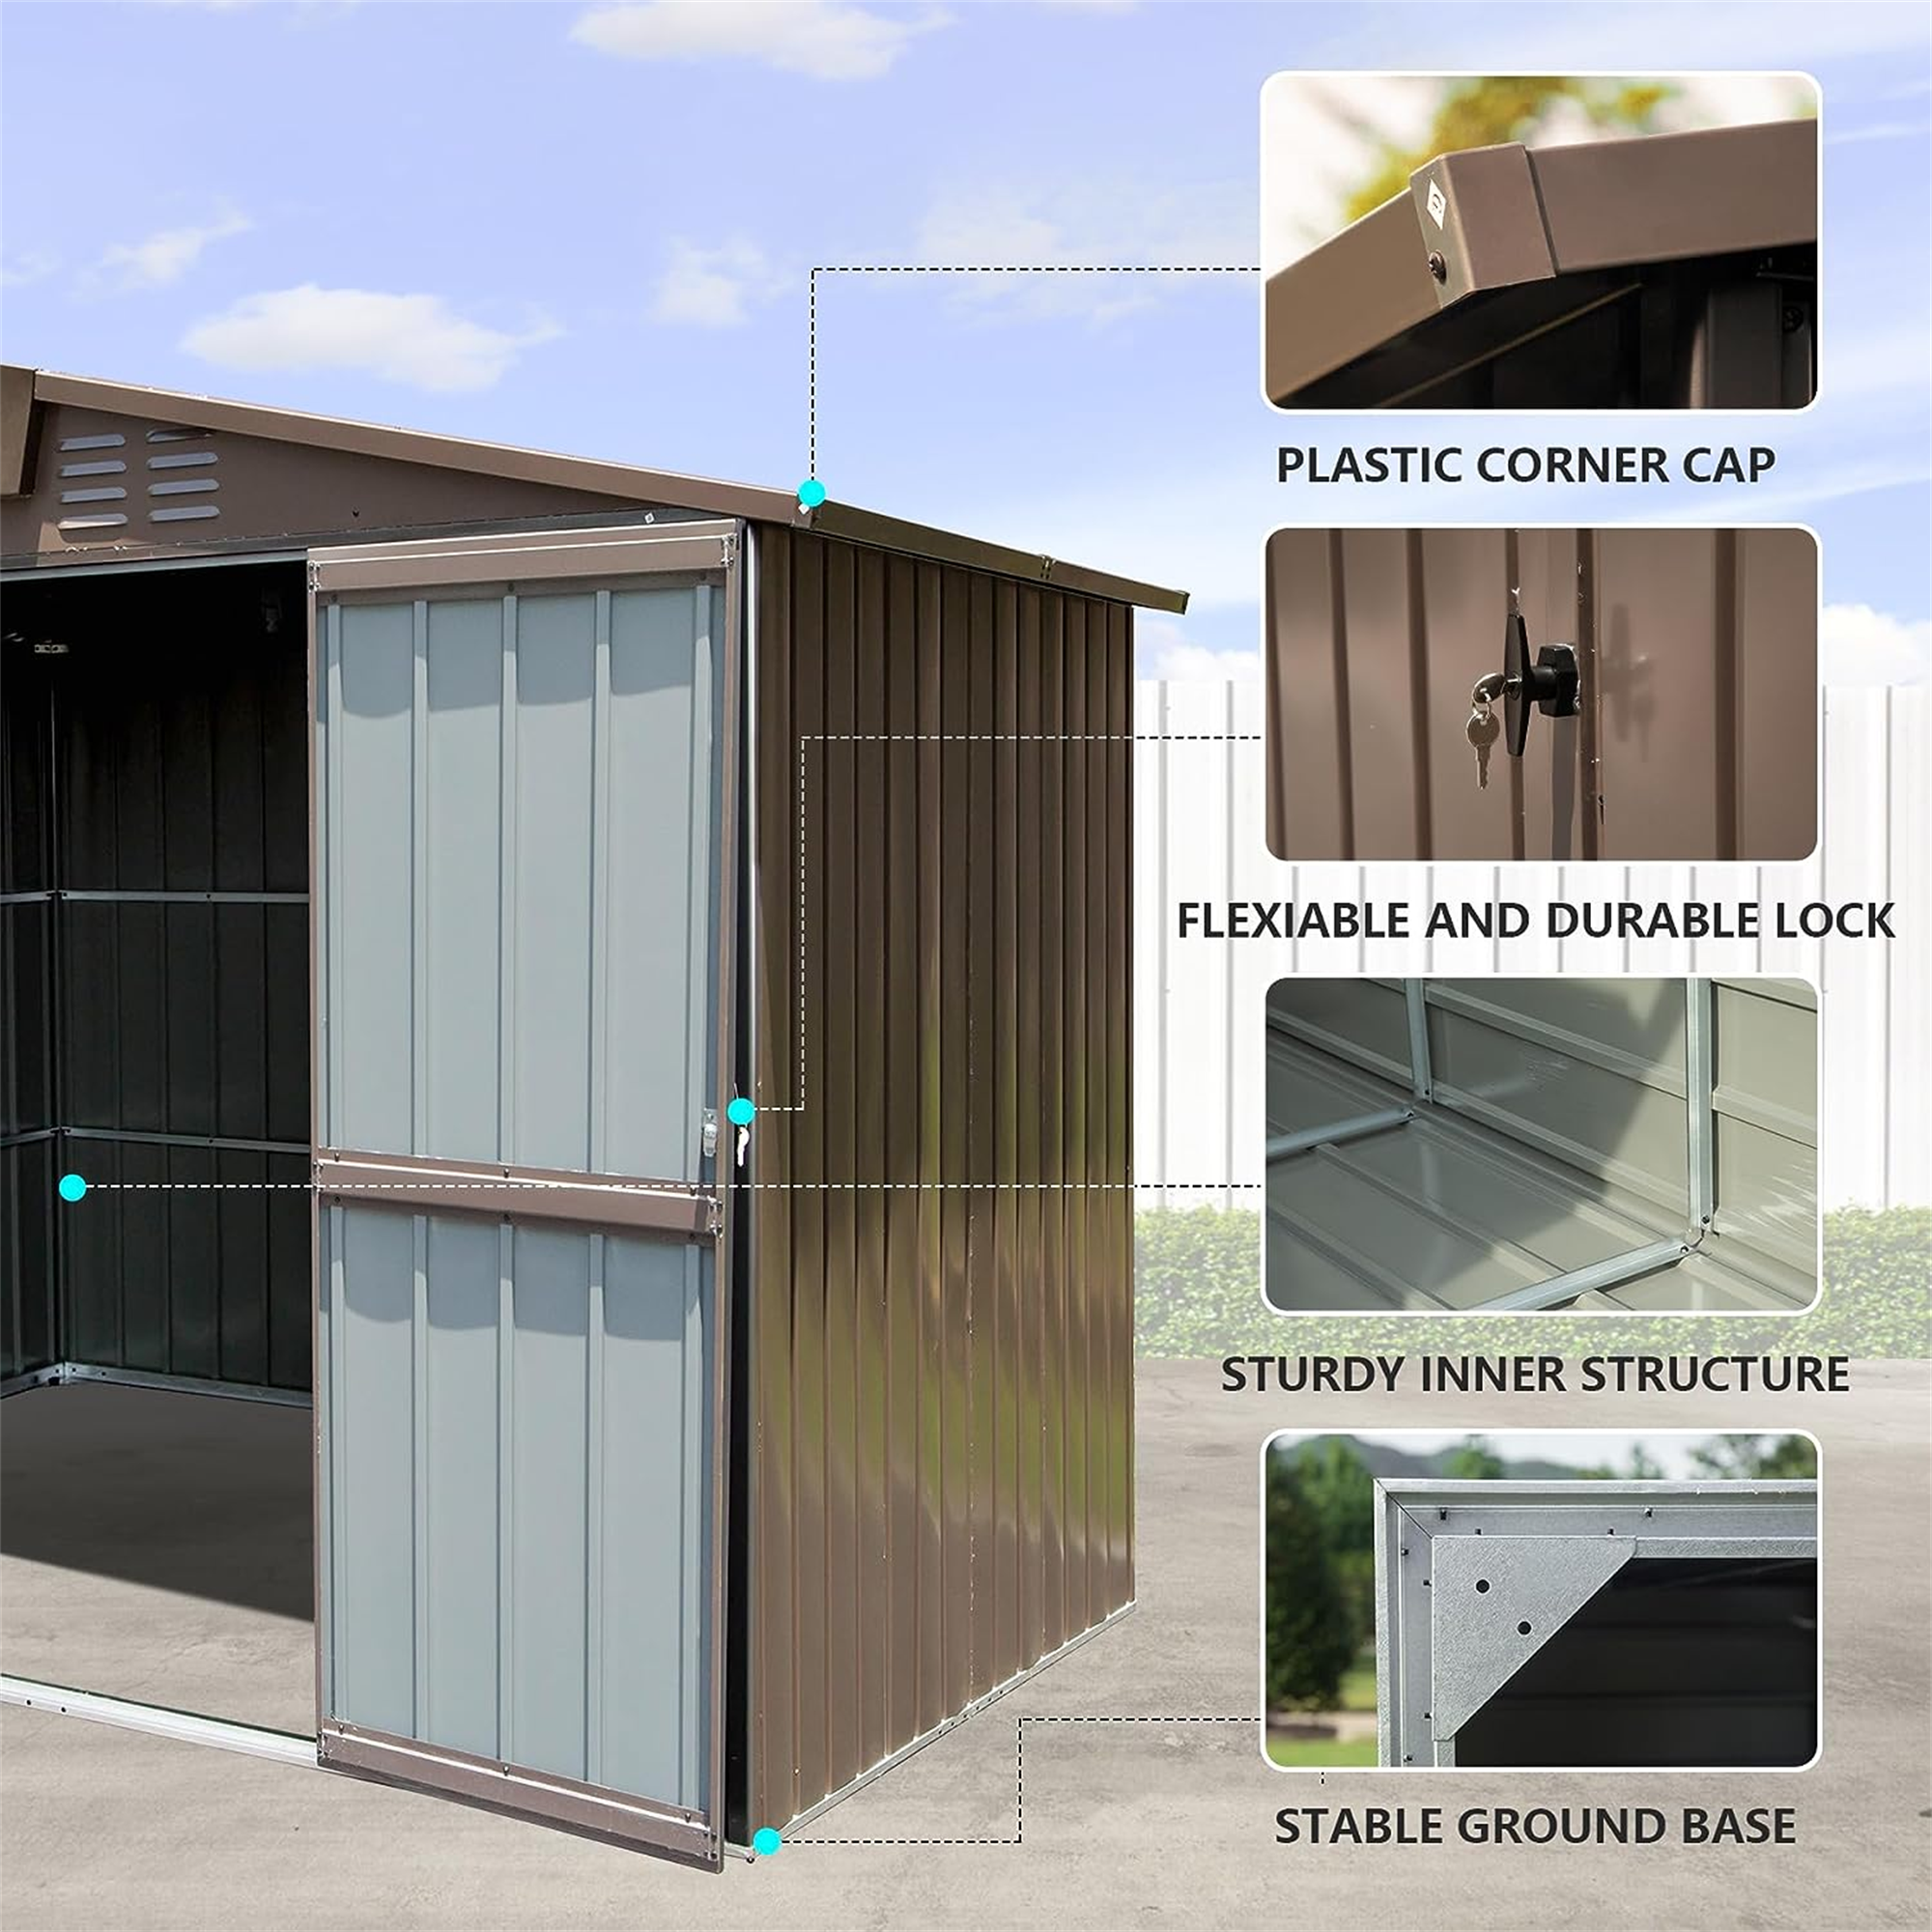 EcoStash 8.2' x 6.2', Metal Steel Utility Tool Shed Storage House with Double Lockable Doors & Air Vents for Backyard Patio Garden Lawn Brown